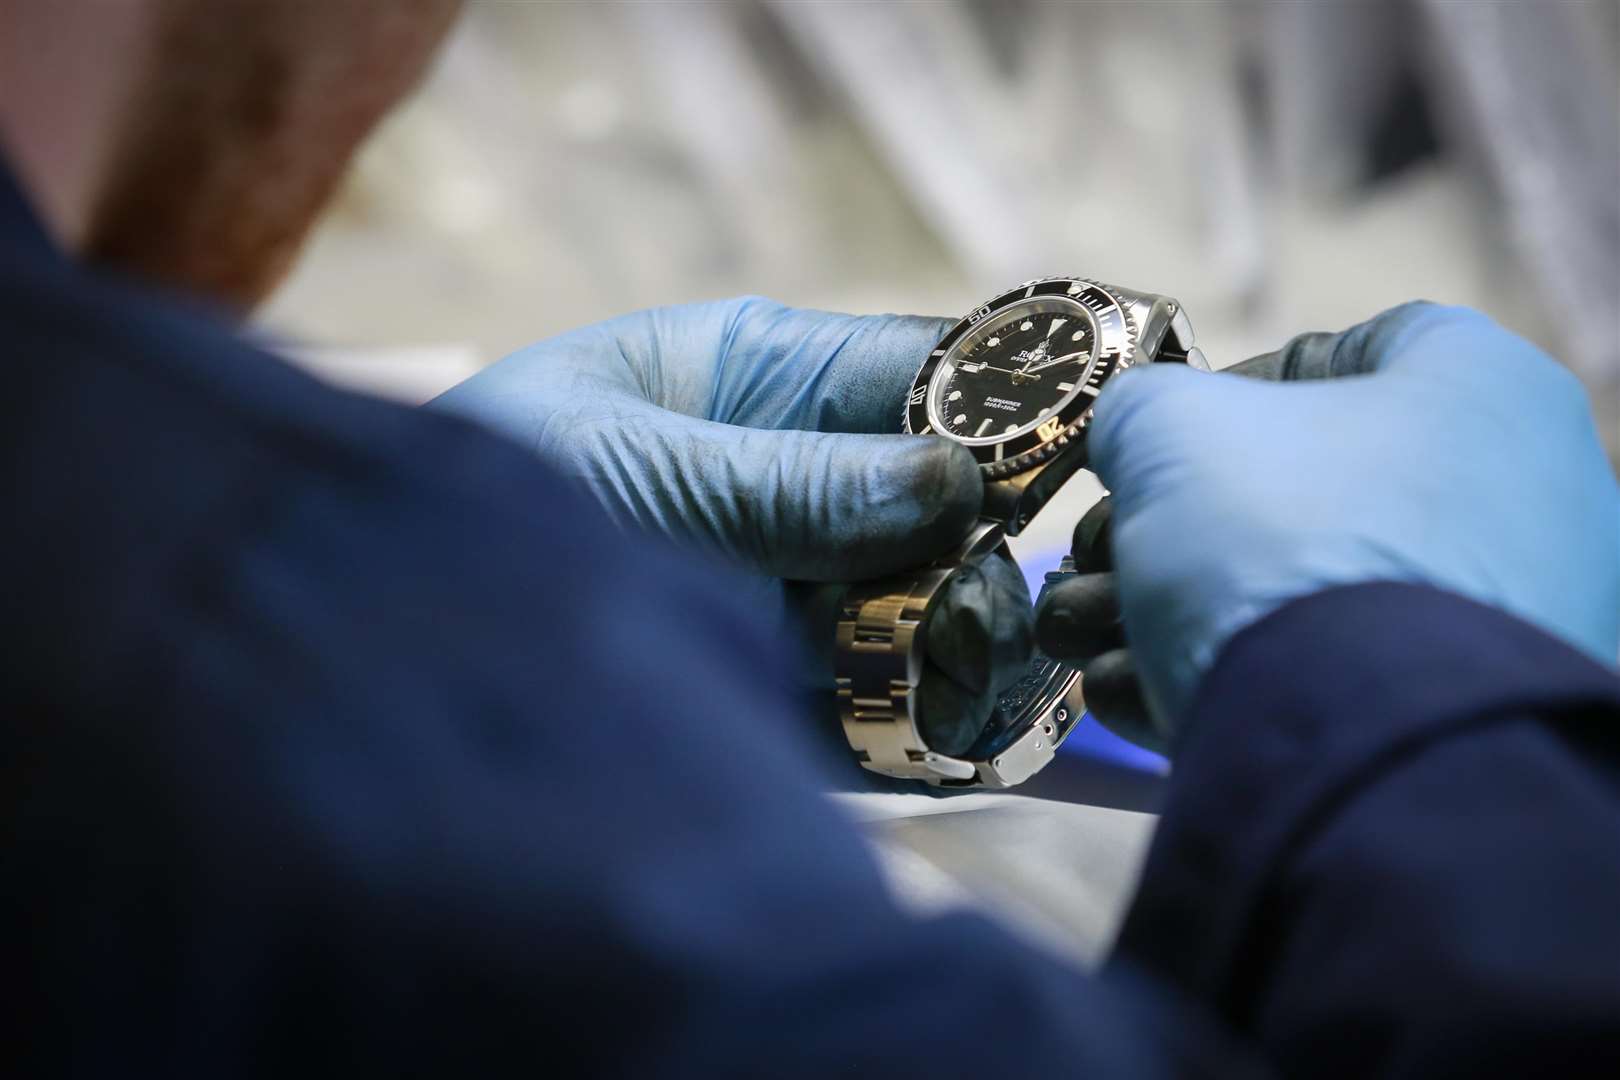 Watchfinder reconditions and sells second-hand luxury watches